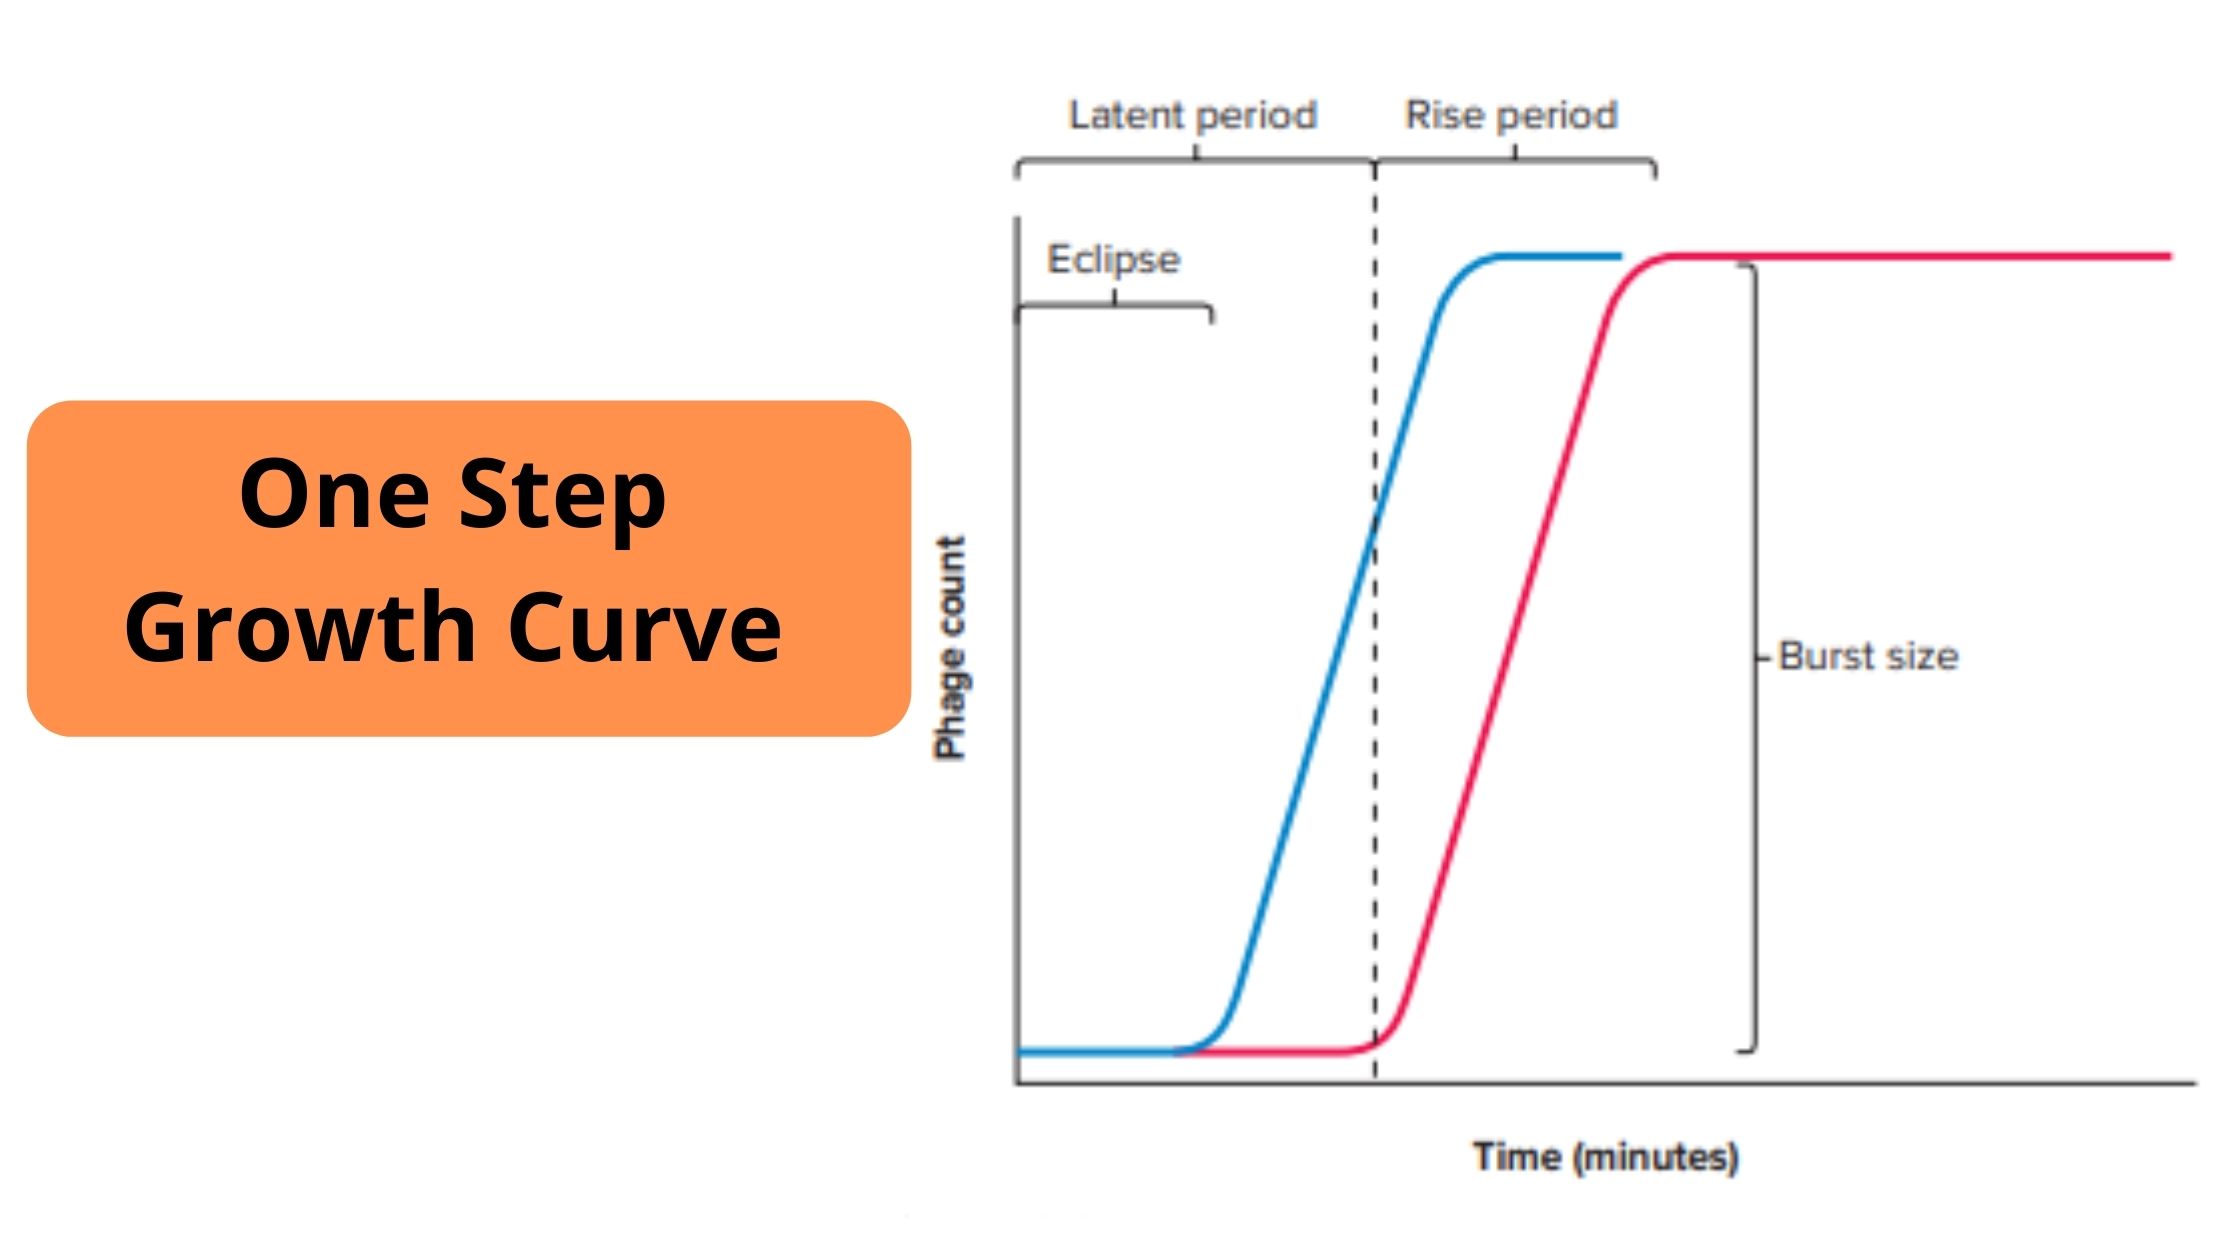 One Step Growth Curve